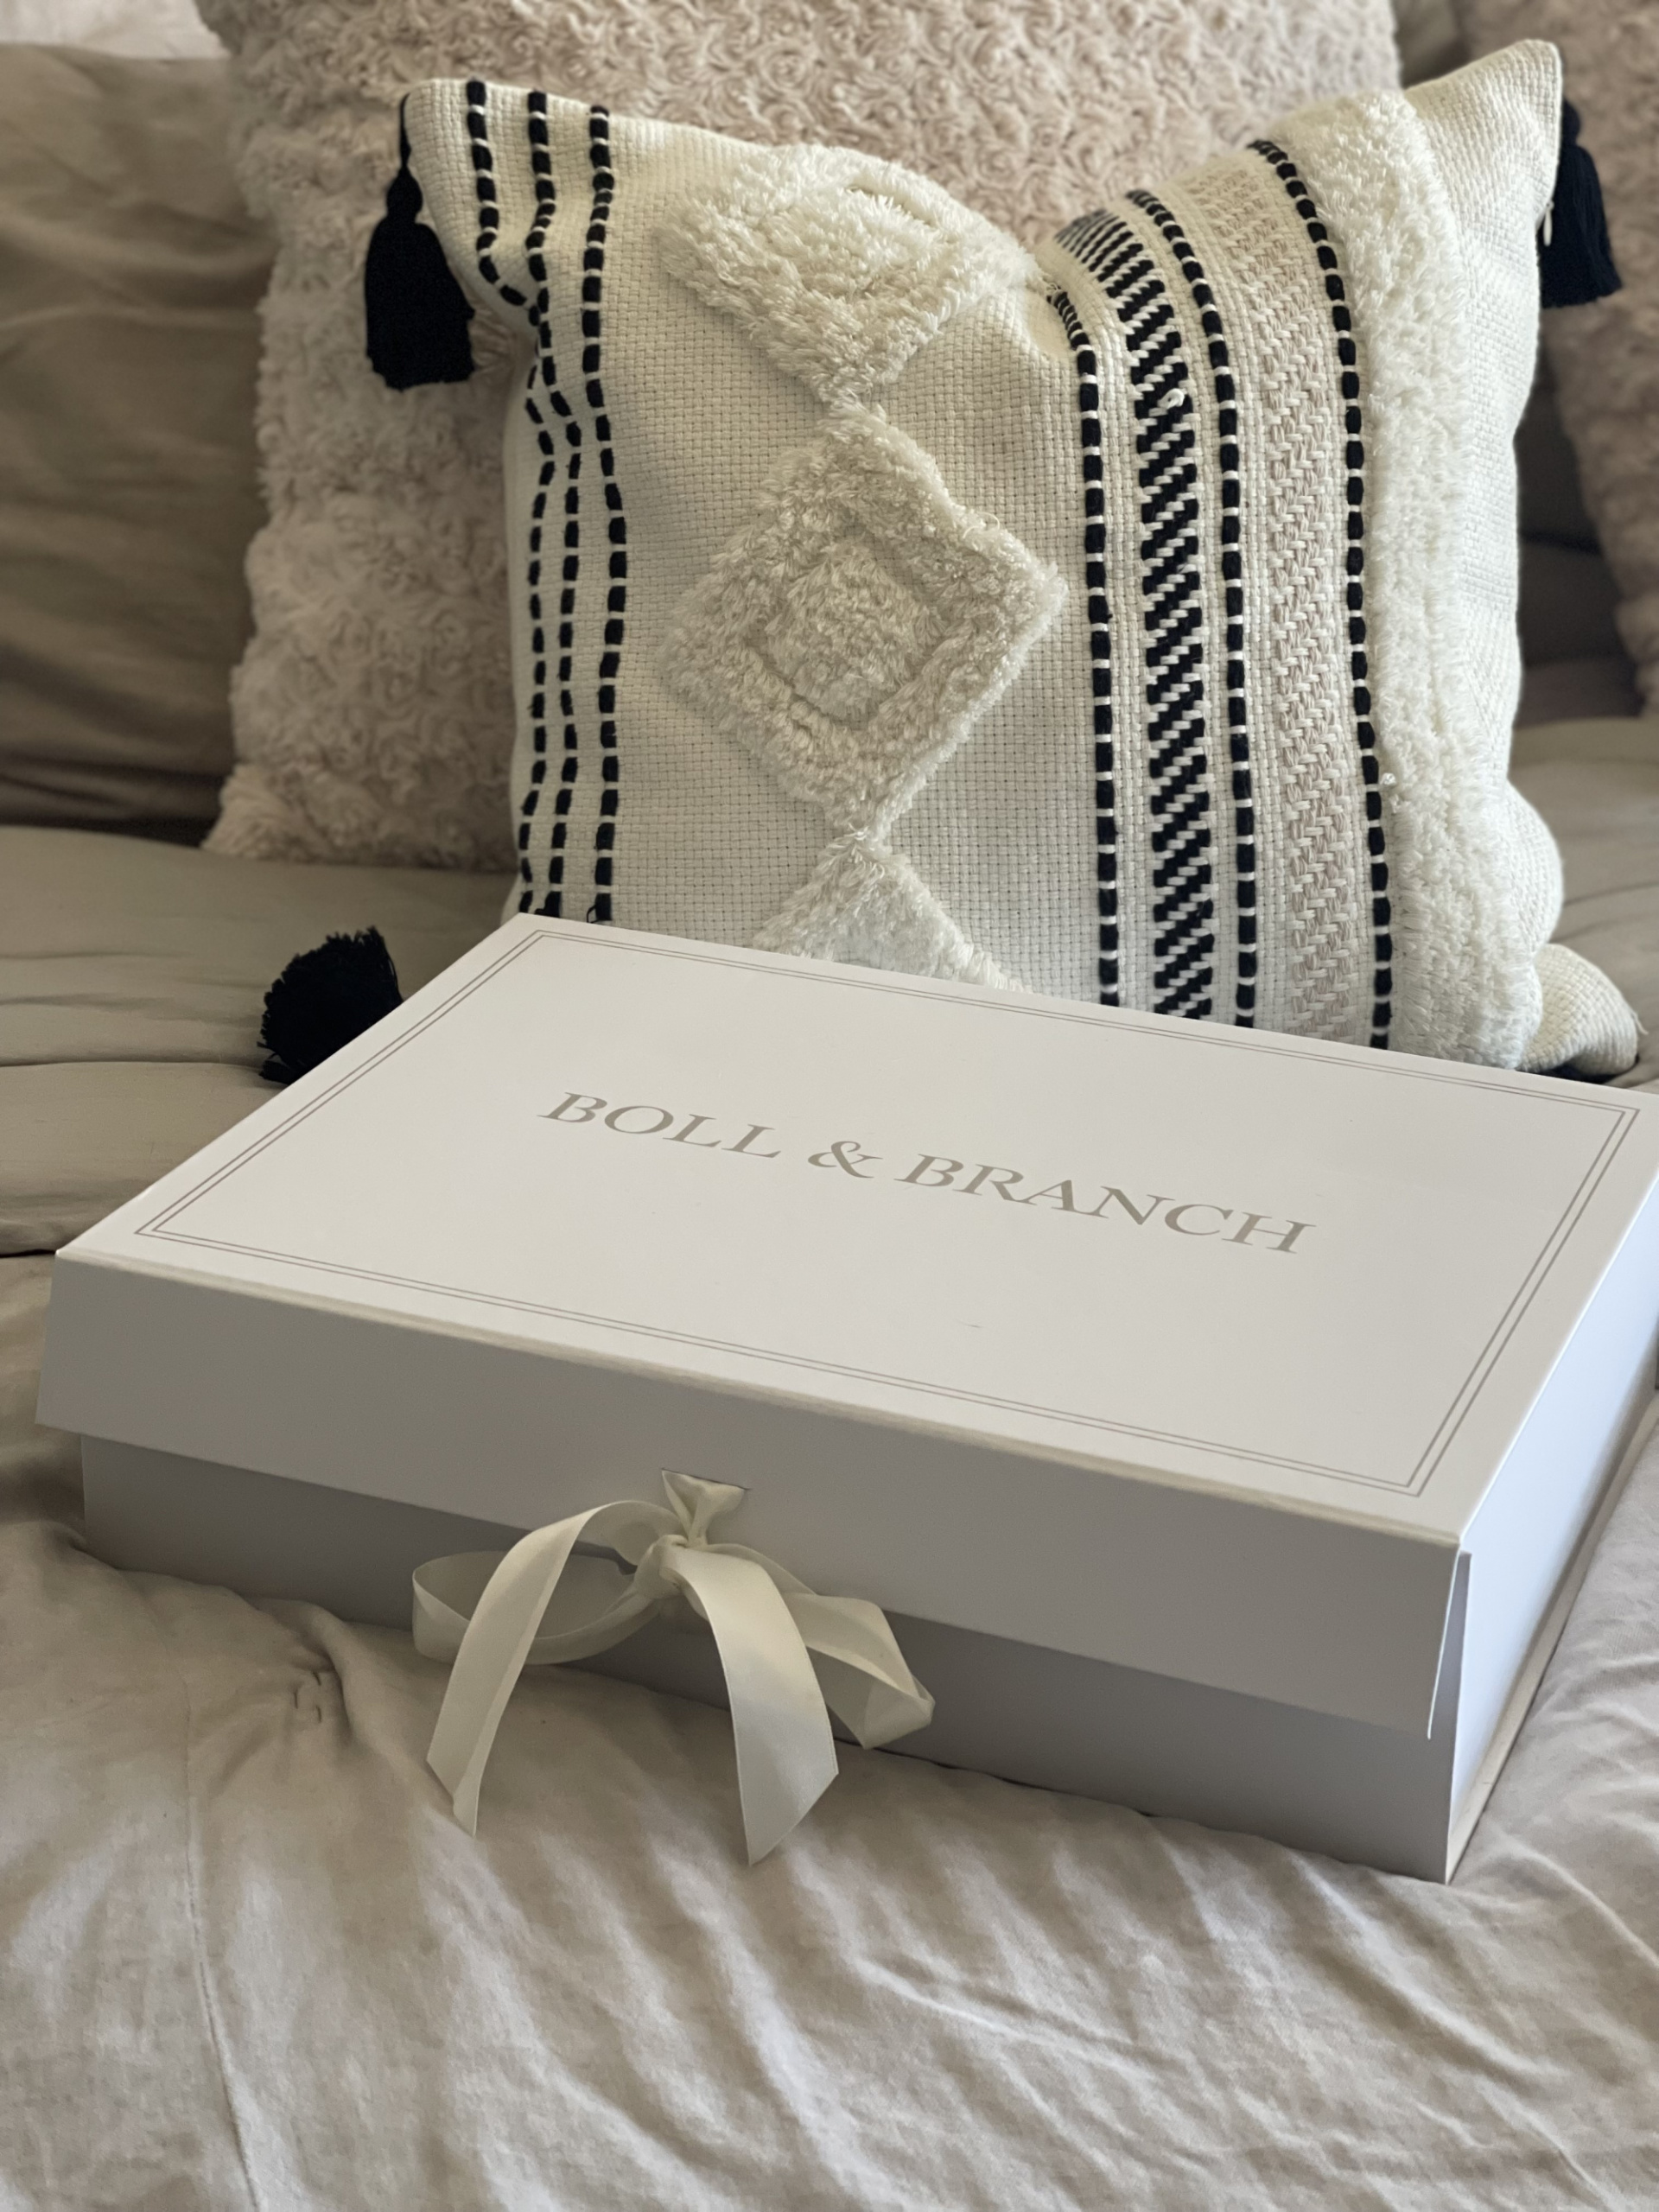 review of Boll & Branch bedding, Boll & Branch sheets, review of Boll & Branch, new bedding for spring, comfortable sheets, organic cotton sheets, sheets with high thread count, sheets for a cool night's sleep